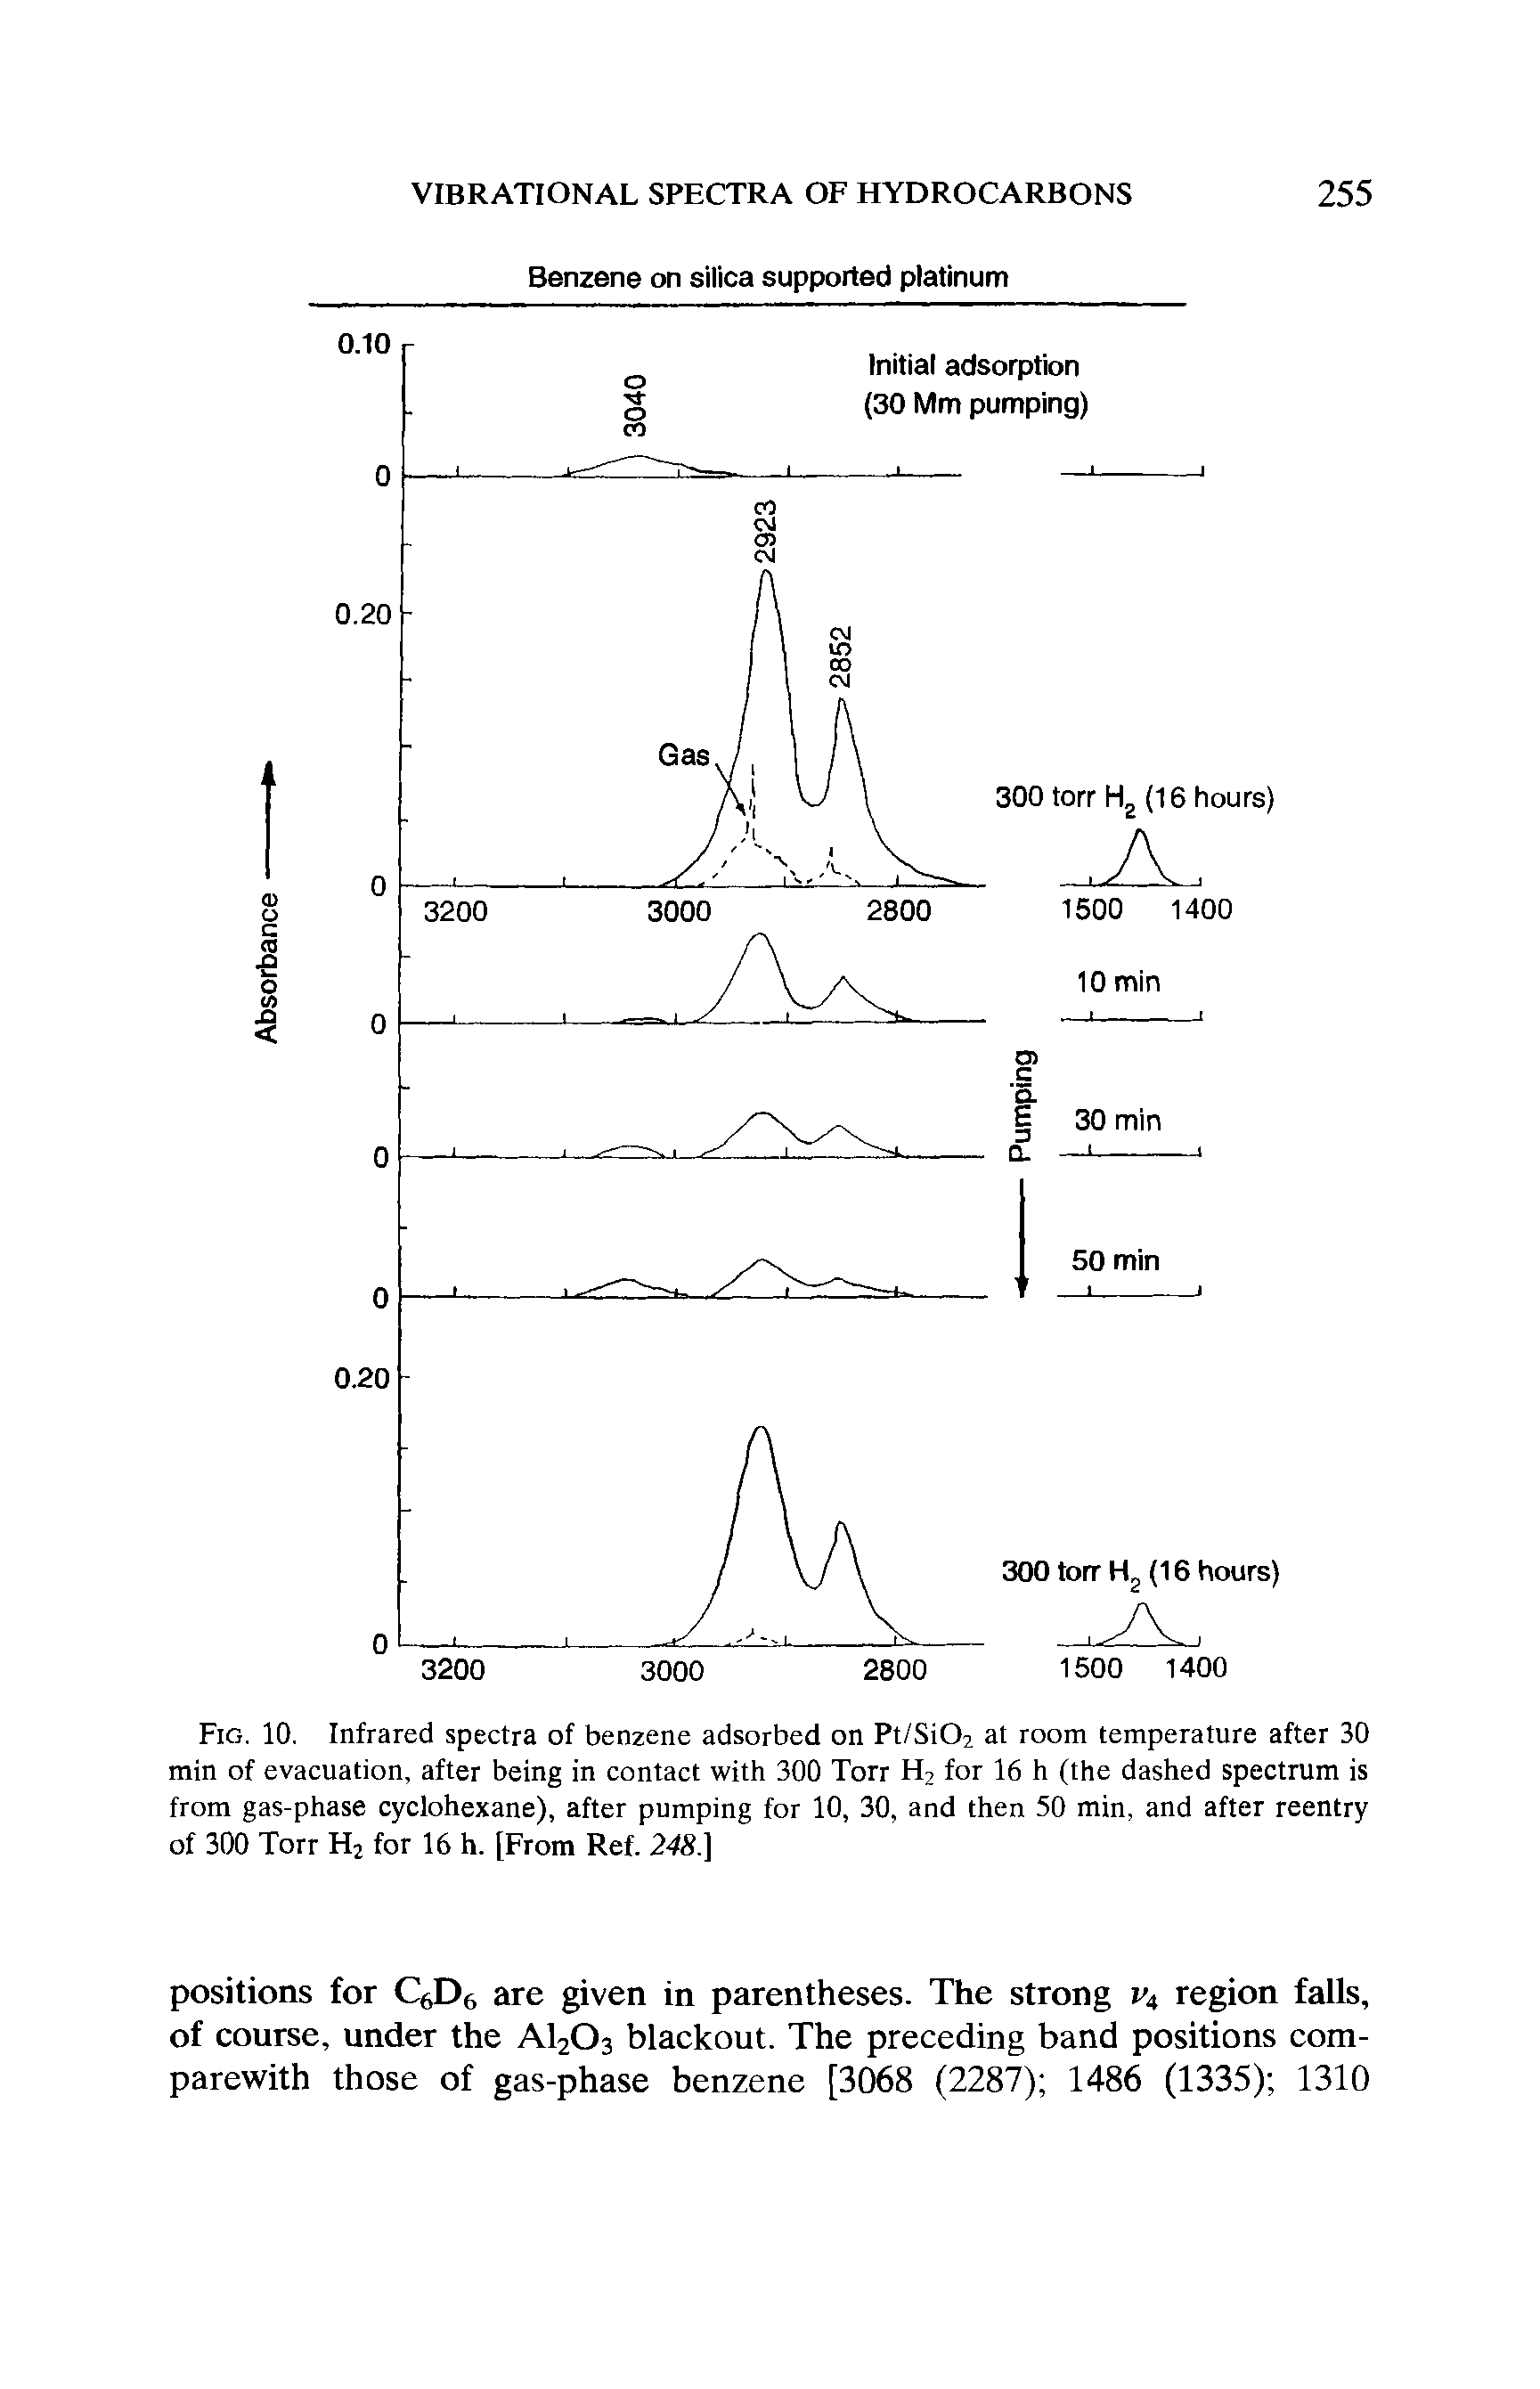 Fig. 10. Infrared spectra of benzene adsorbed on Pt/Si02 at room temperature after 30 min of evacuation, after being in contact with 300 Torr H2 for 16 h (the dashed spectrum is from gas-phase cyclohexane), after pumping for 10, 30, and then 50 min, and after reentry of 300 Torr H2 for 16 h. [From Ref. 248.]...